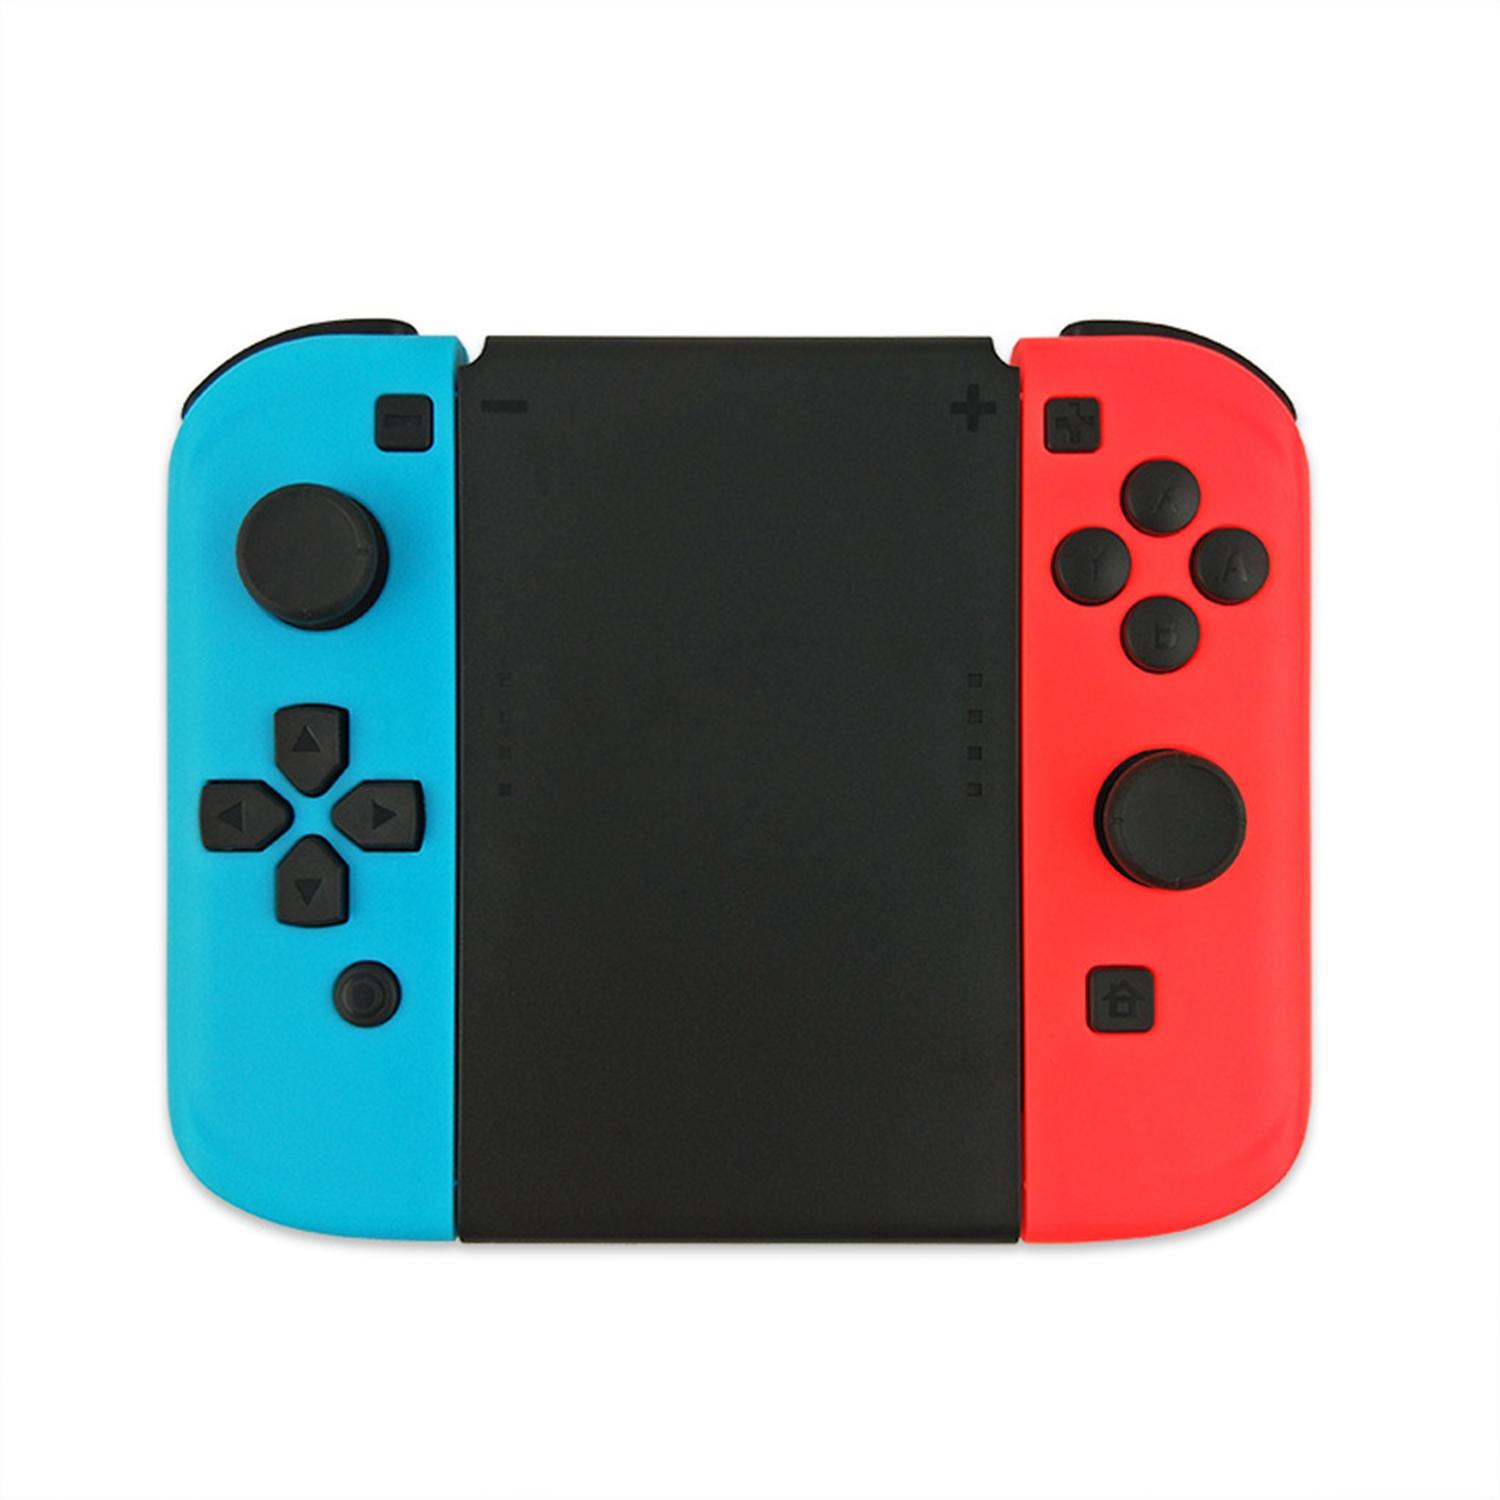 5 In 1 Connector Pack for Nintendo Switch Joy-Con Gamepad Game Controller Hand Grip Case Handle Hold